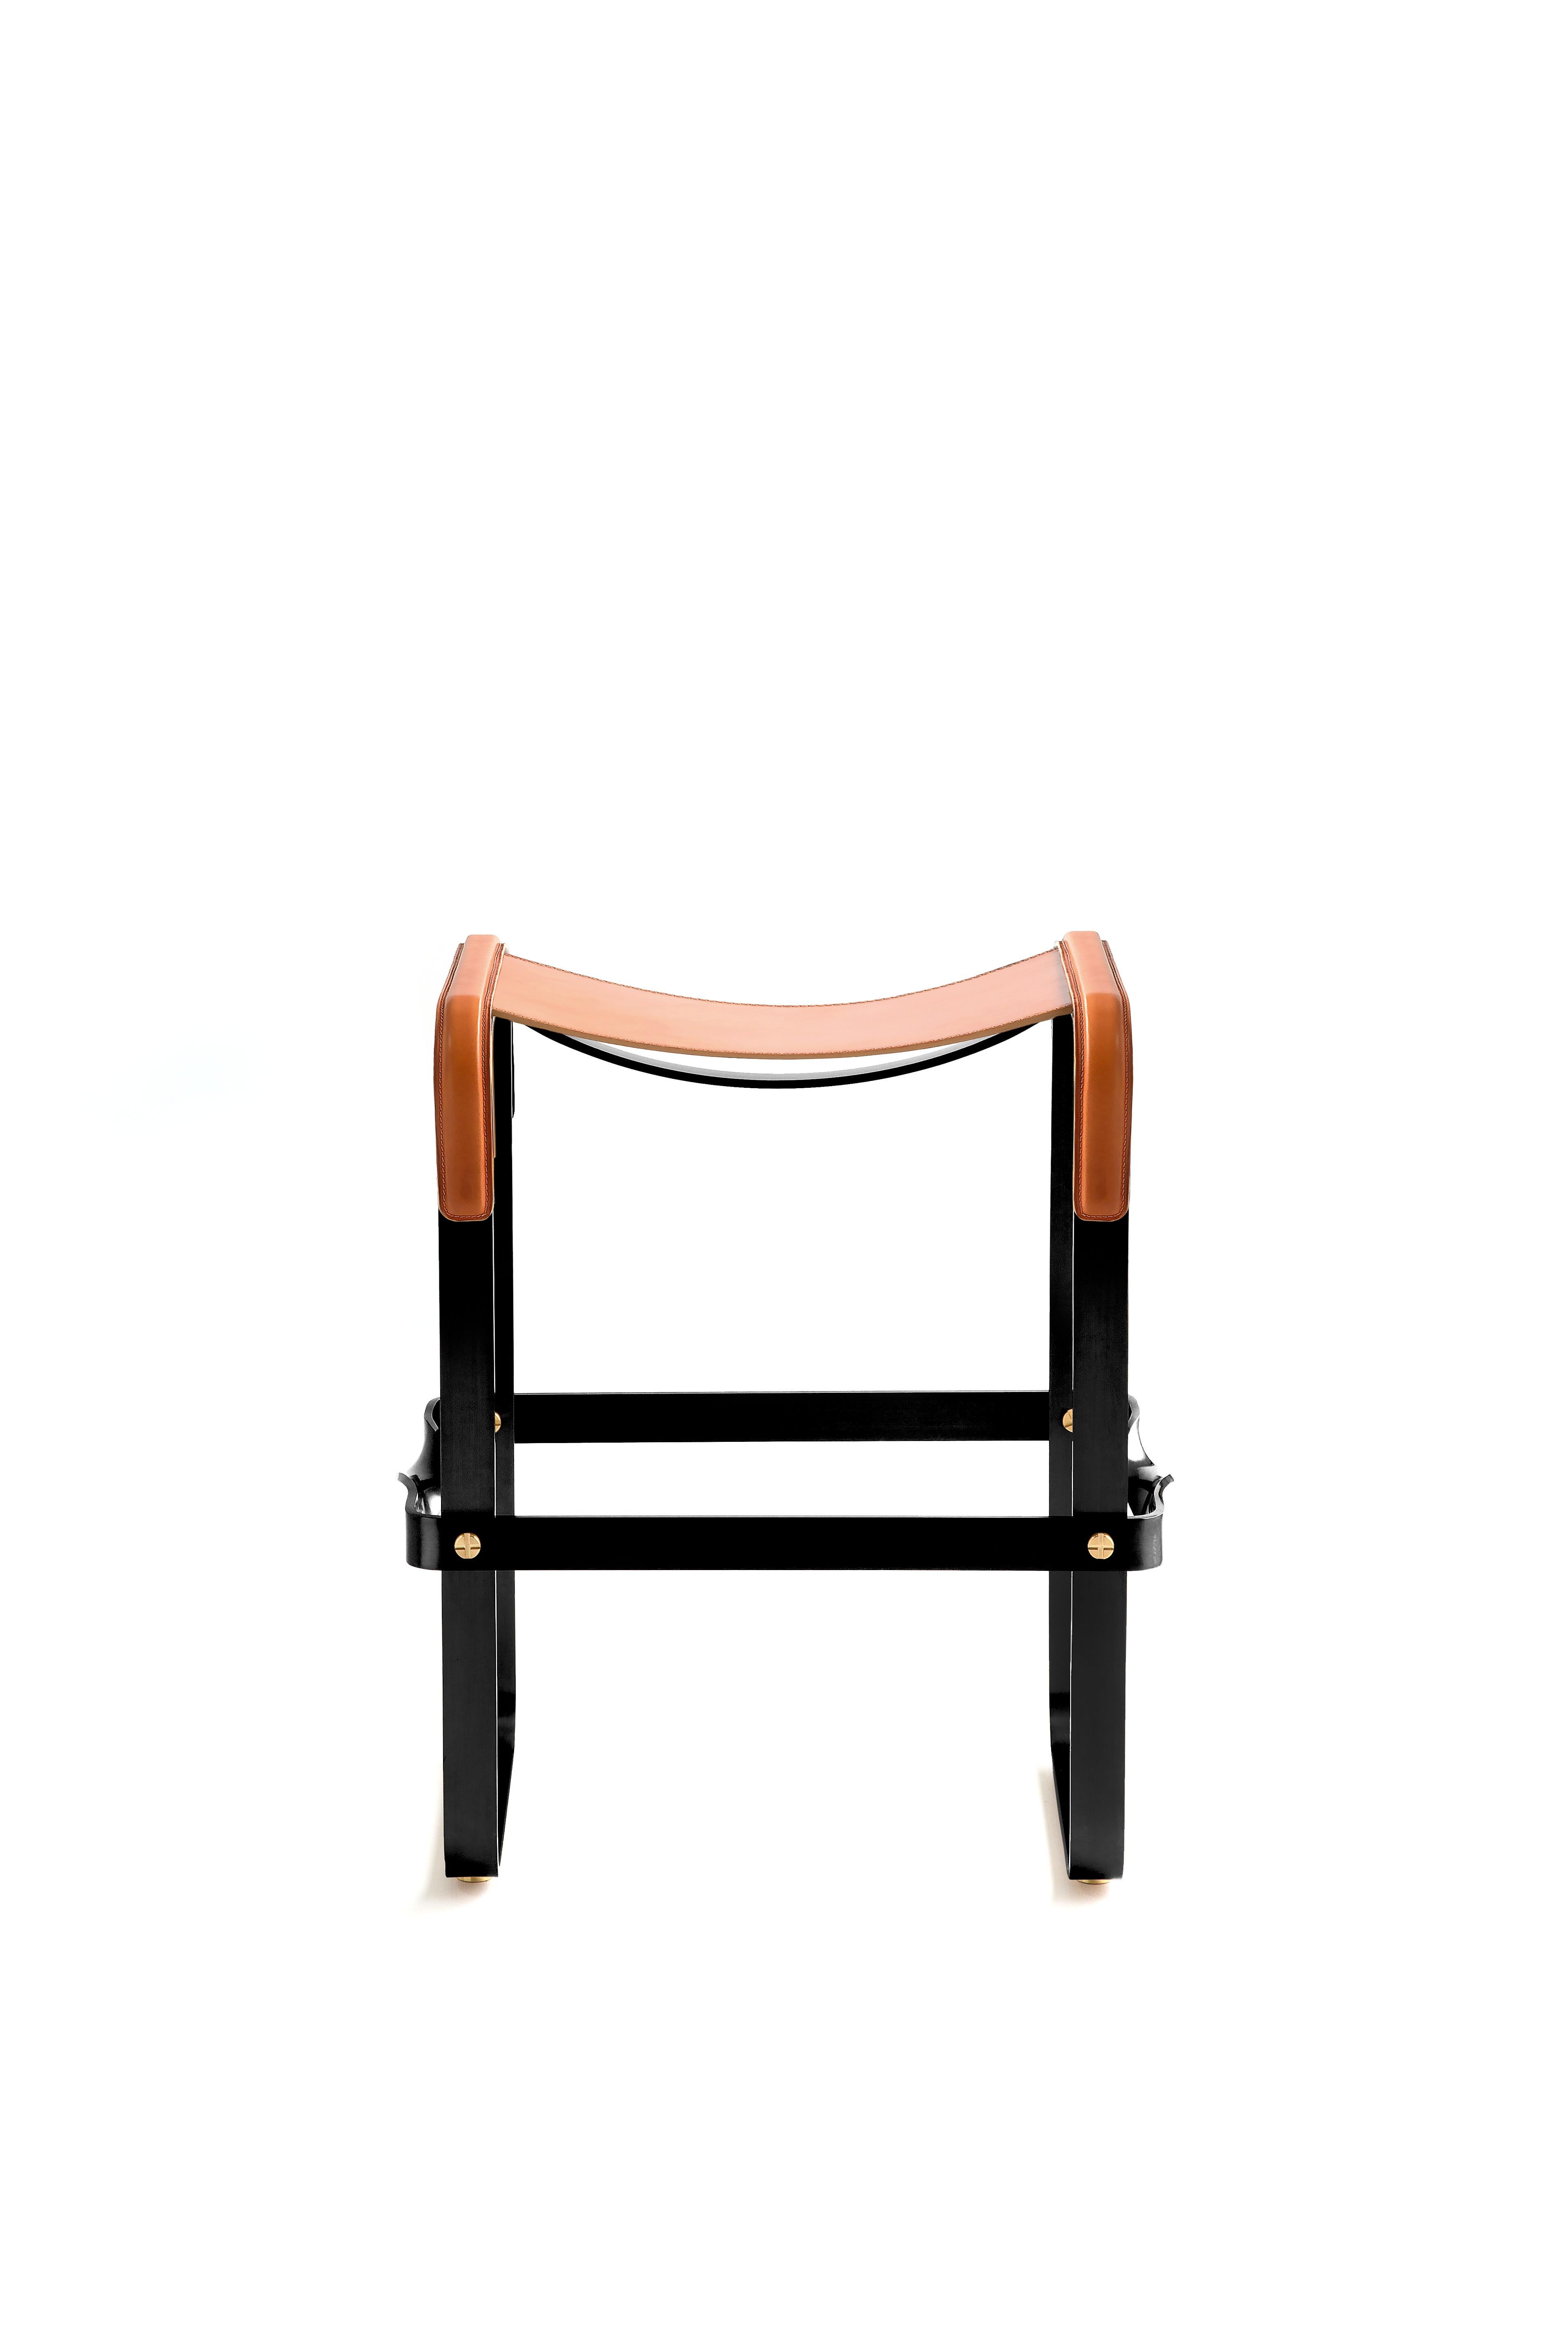 Counter stool in black smoke polished steel and Natural Tobacco saddle leather.

The phrases 